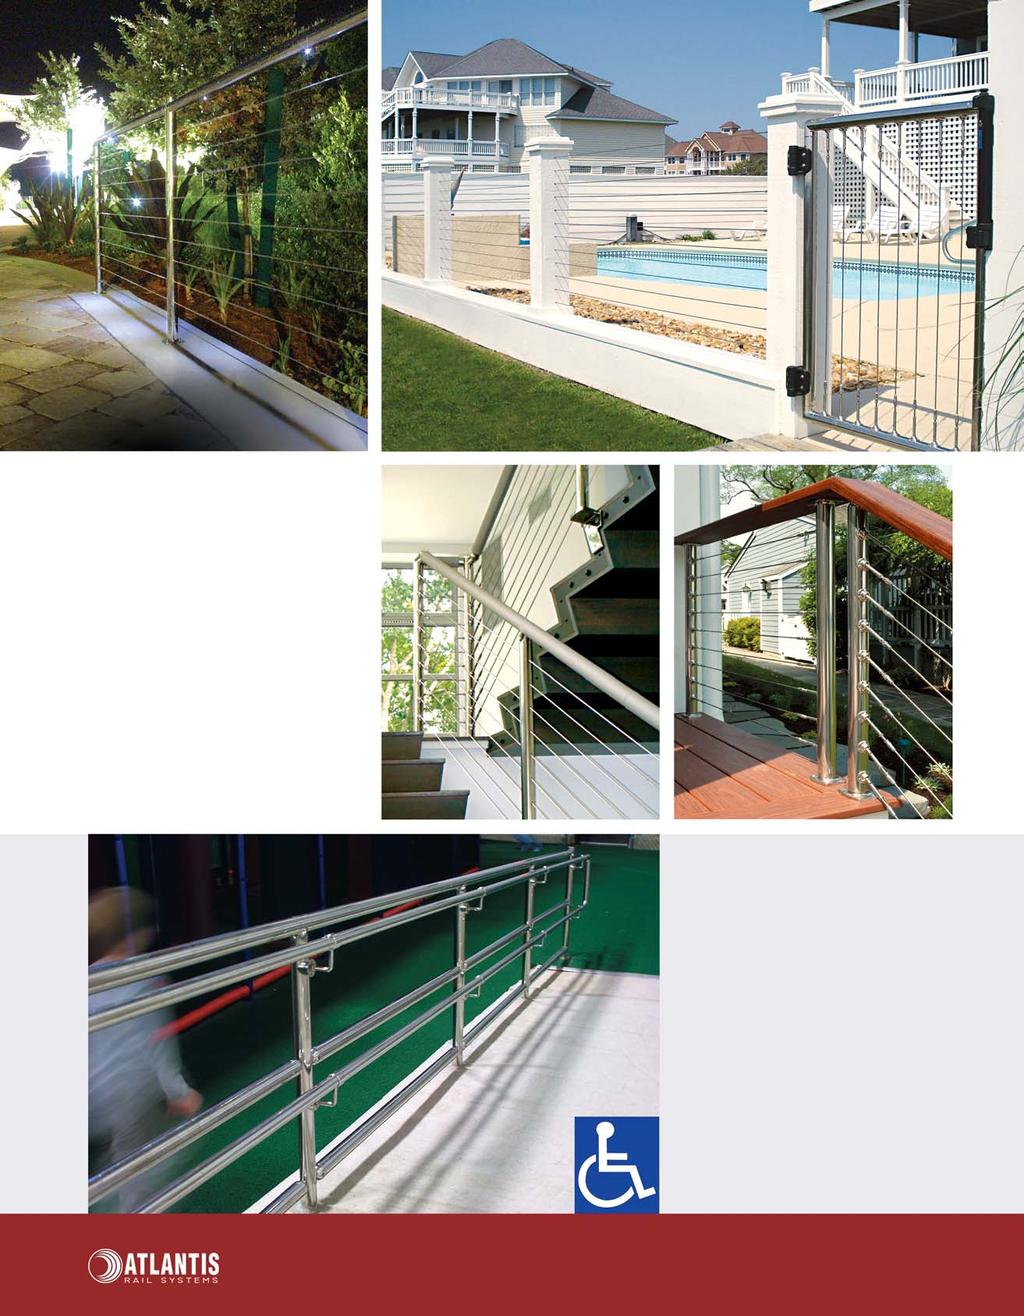 LED ccent Lighting USTOM Stainless Gates ll tlantis Rail systems feature modular components to allow for customization in any size indoor or outdoor project.